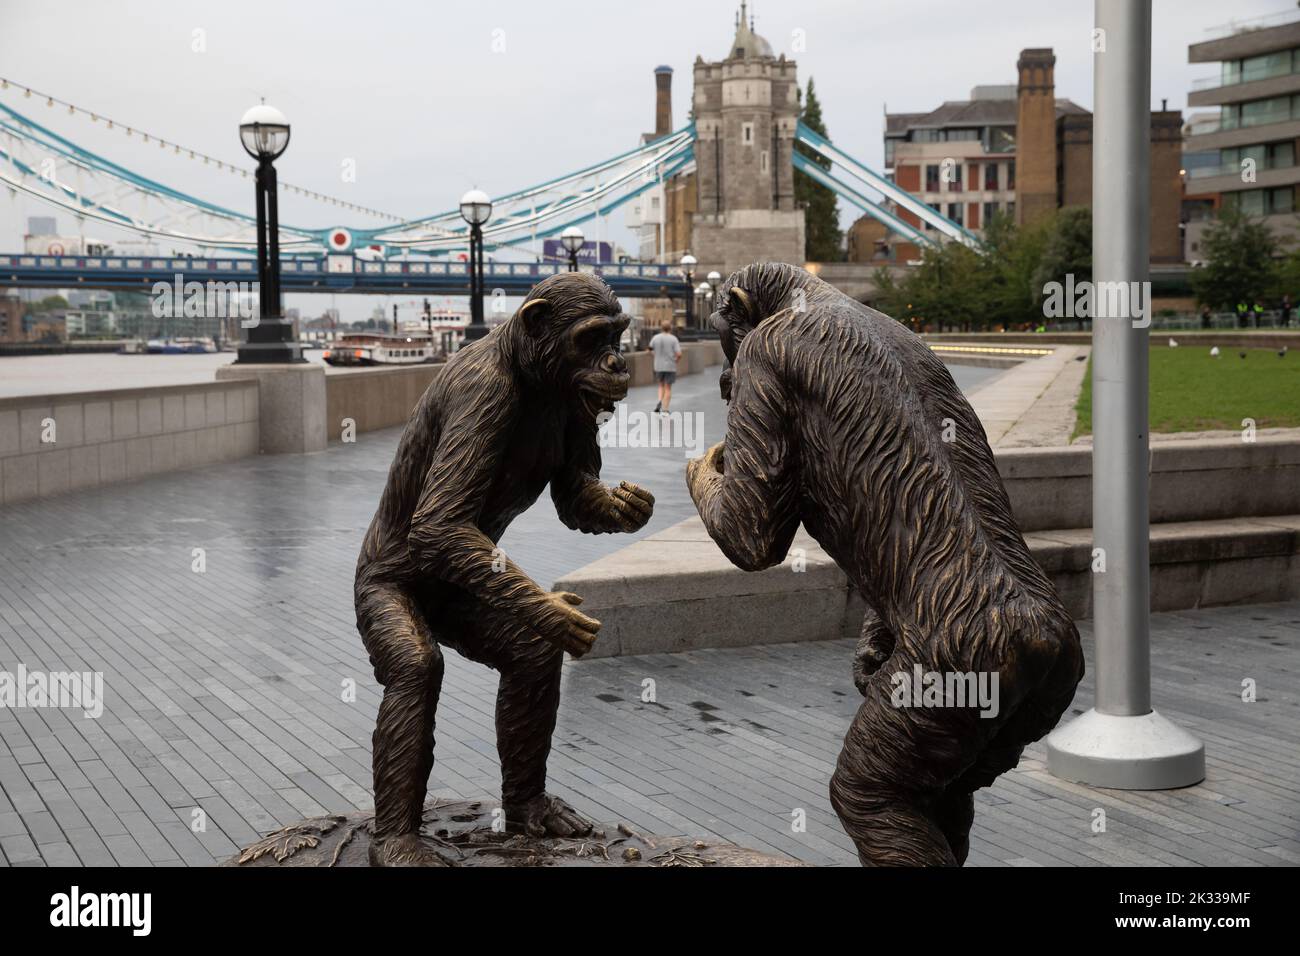 Chimps are Family outdoor exhibition in London Bridge City, London Stock Photo